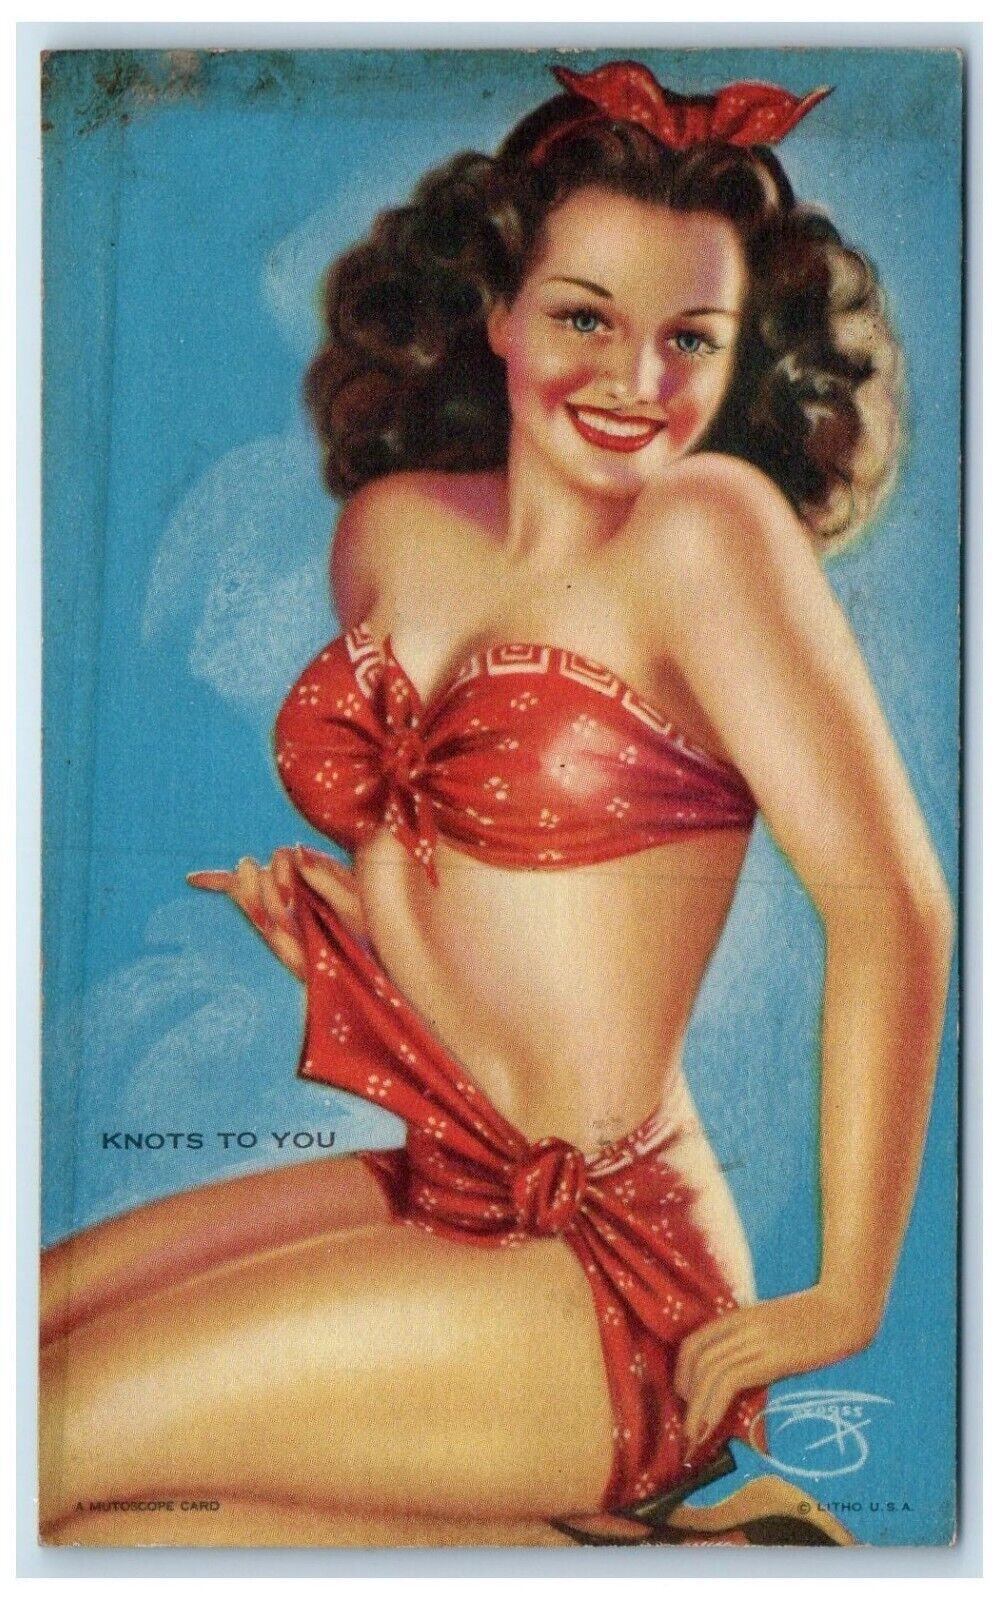 c1950's Mutoscope Follies Girl Pin Up Sexy Knots To You Exhibit Arcade Card